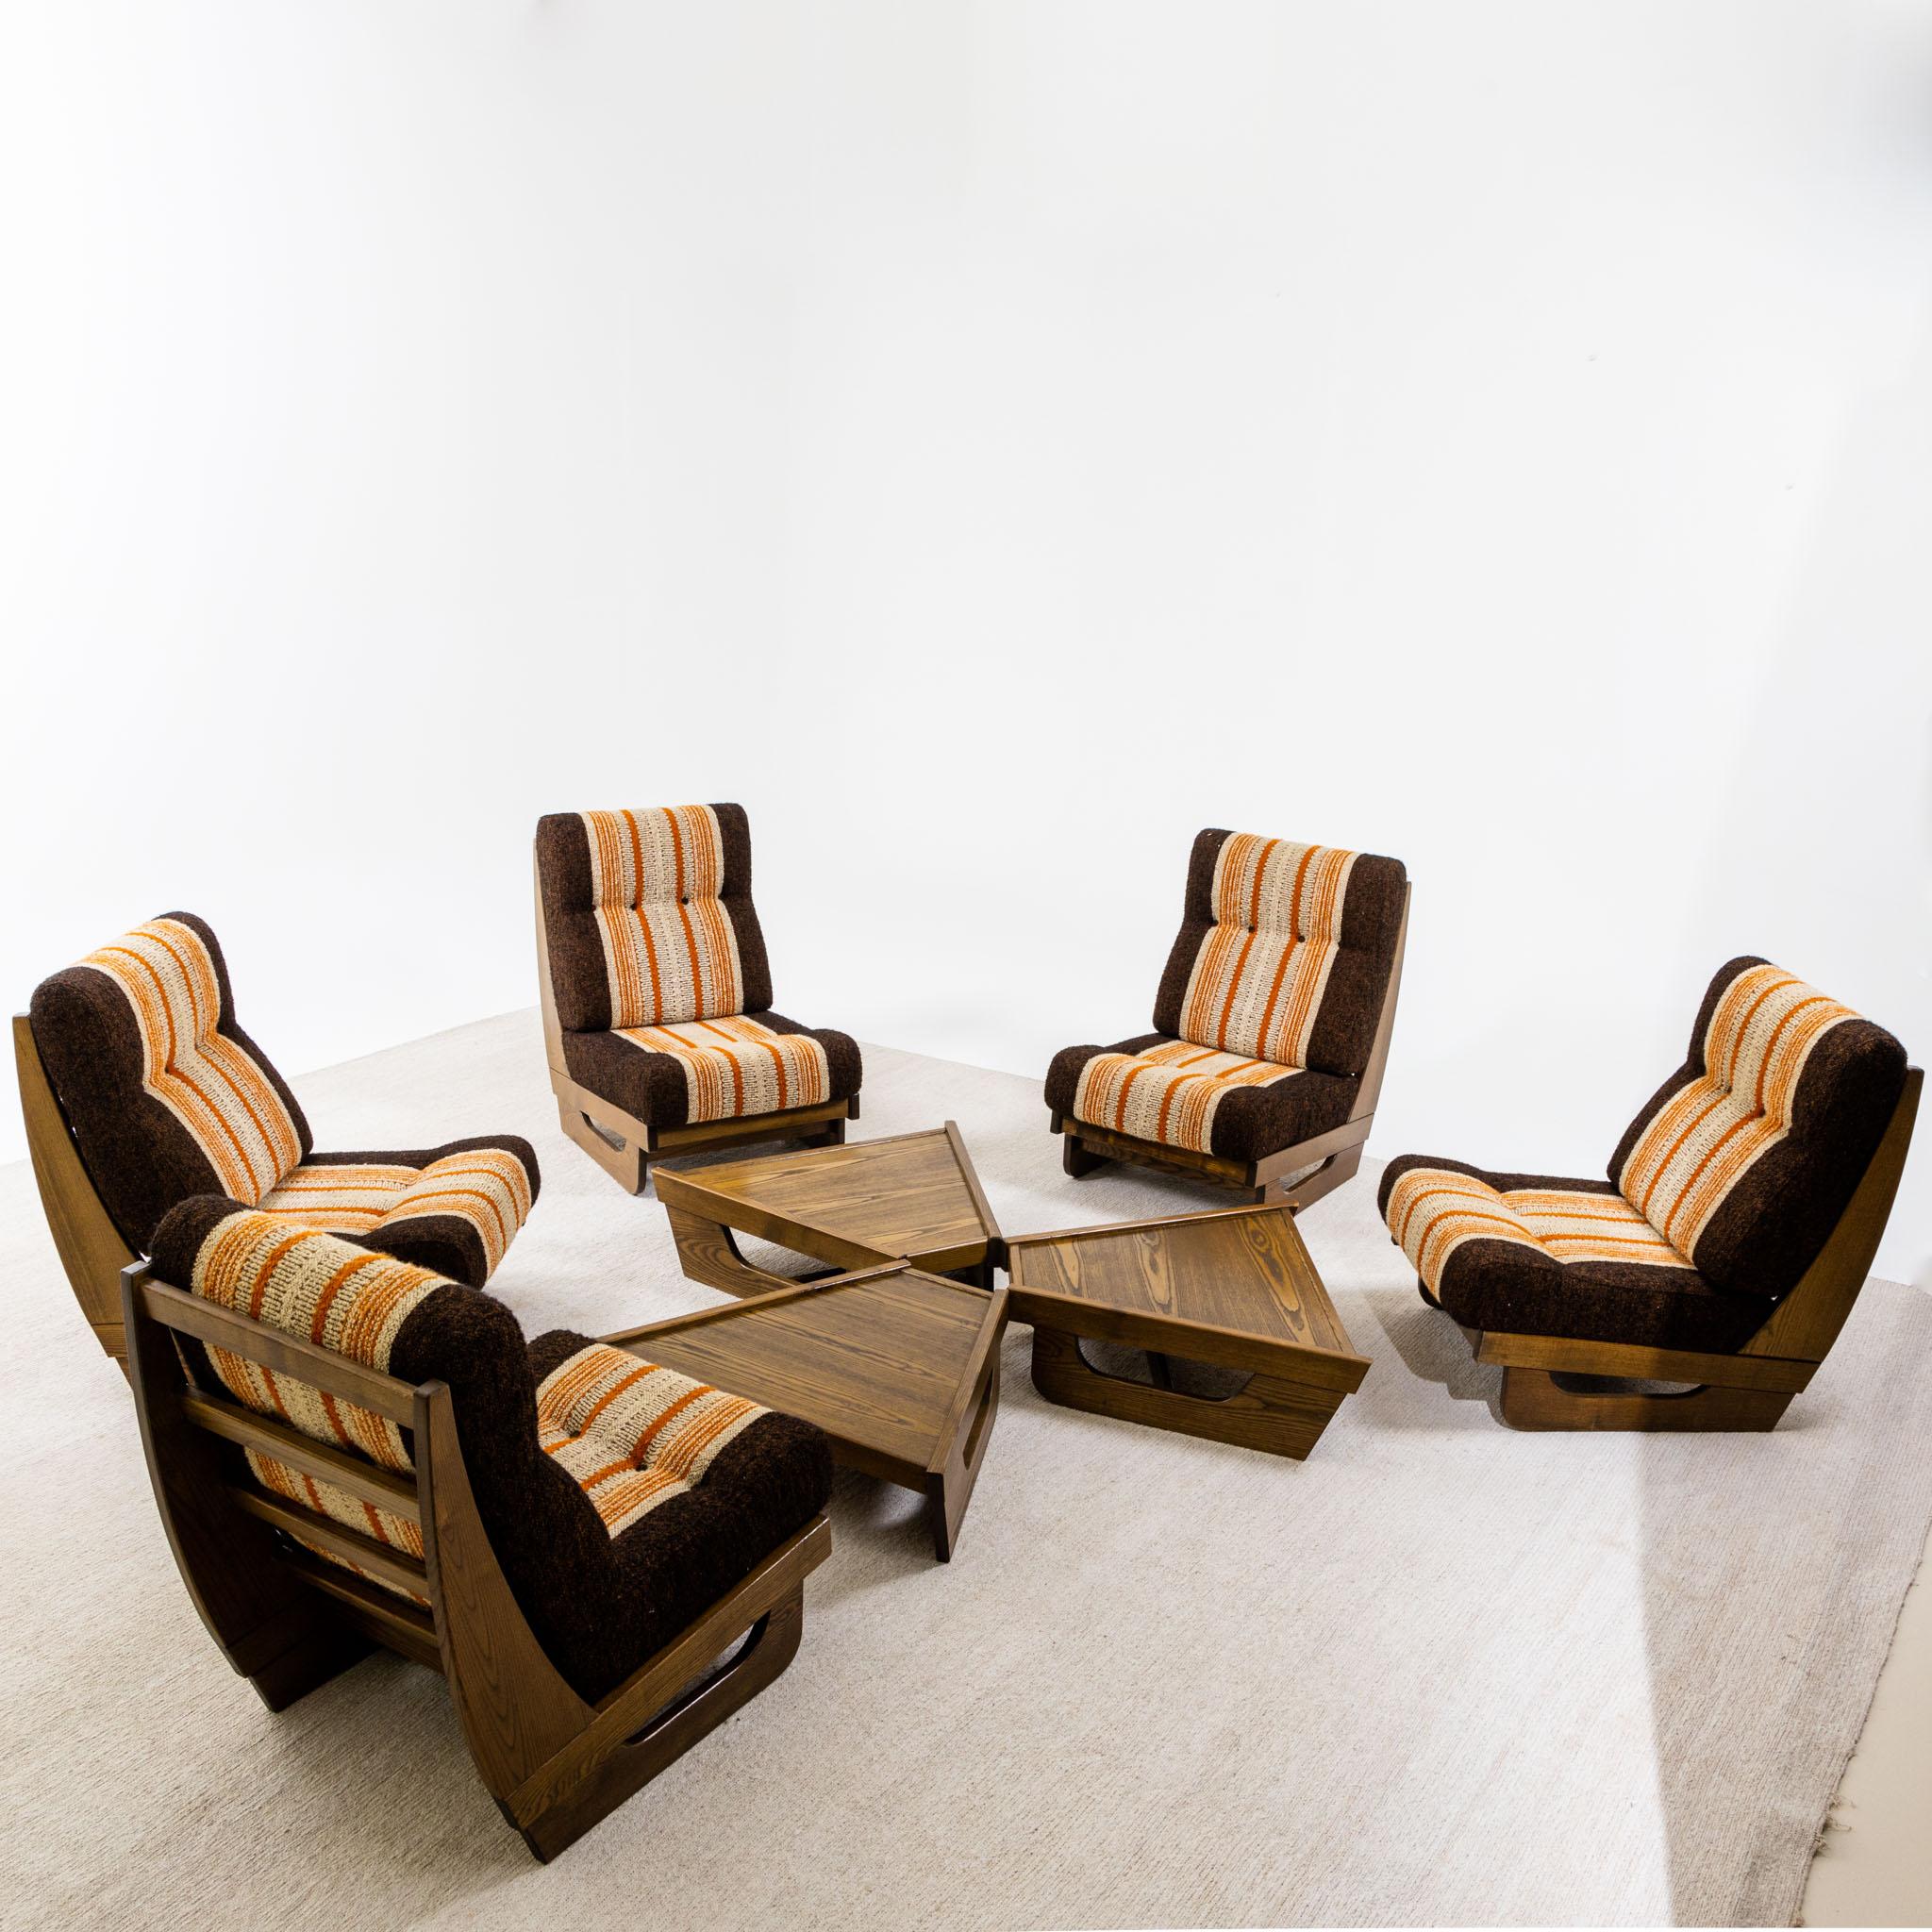 Modular Seating Group with five Lounge Chairs, Italy 1950s For Sale 1